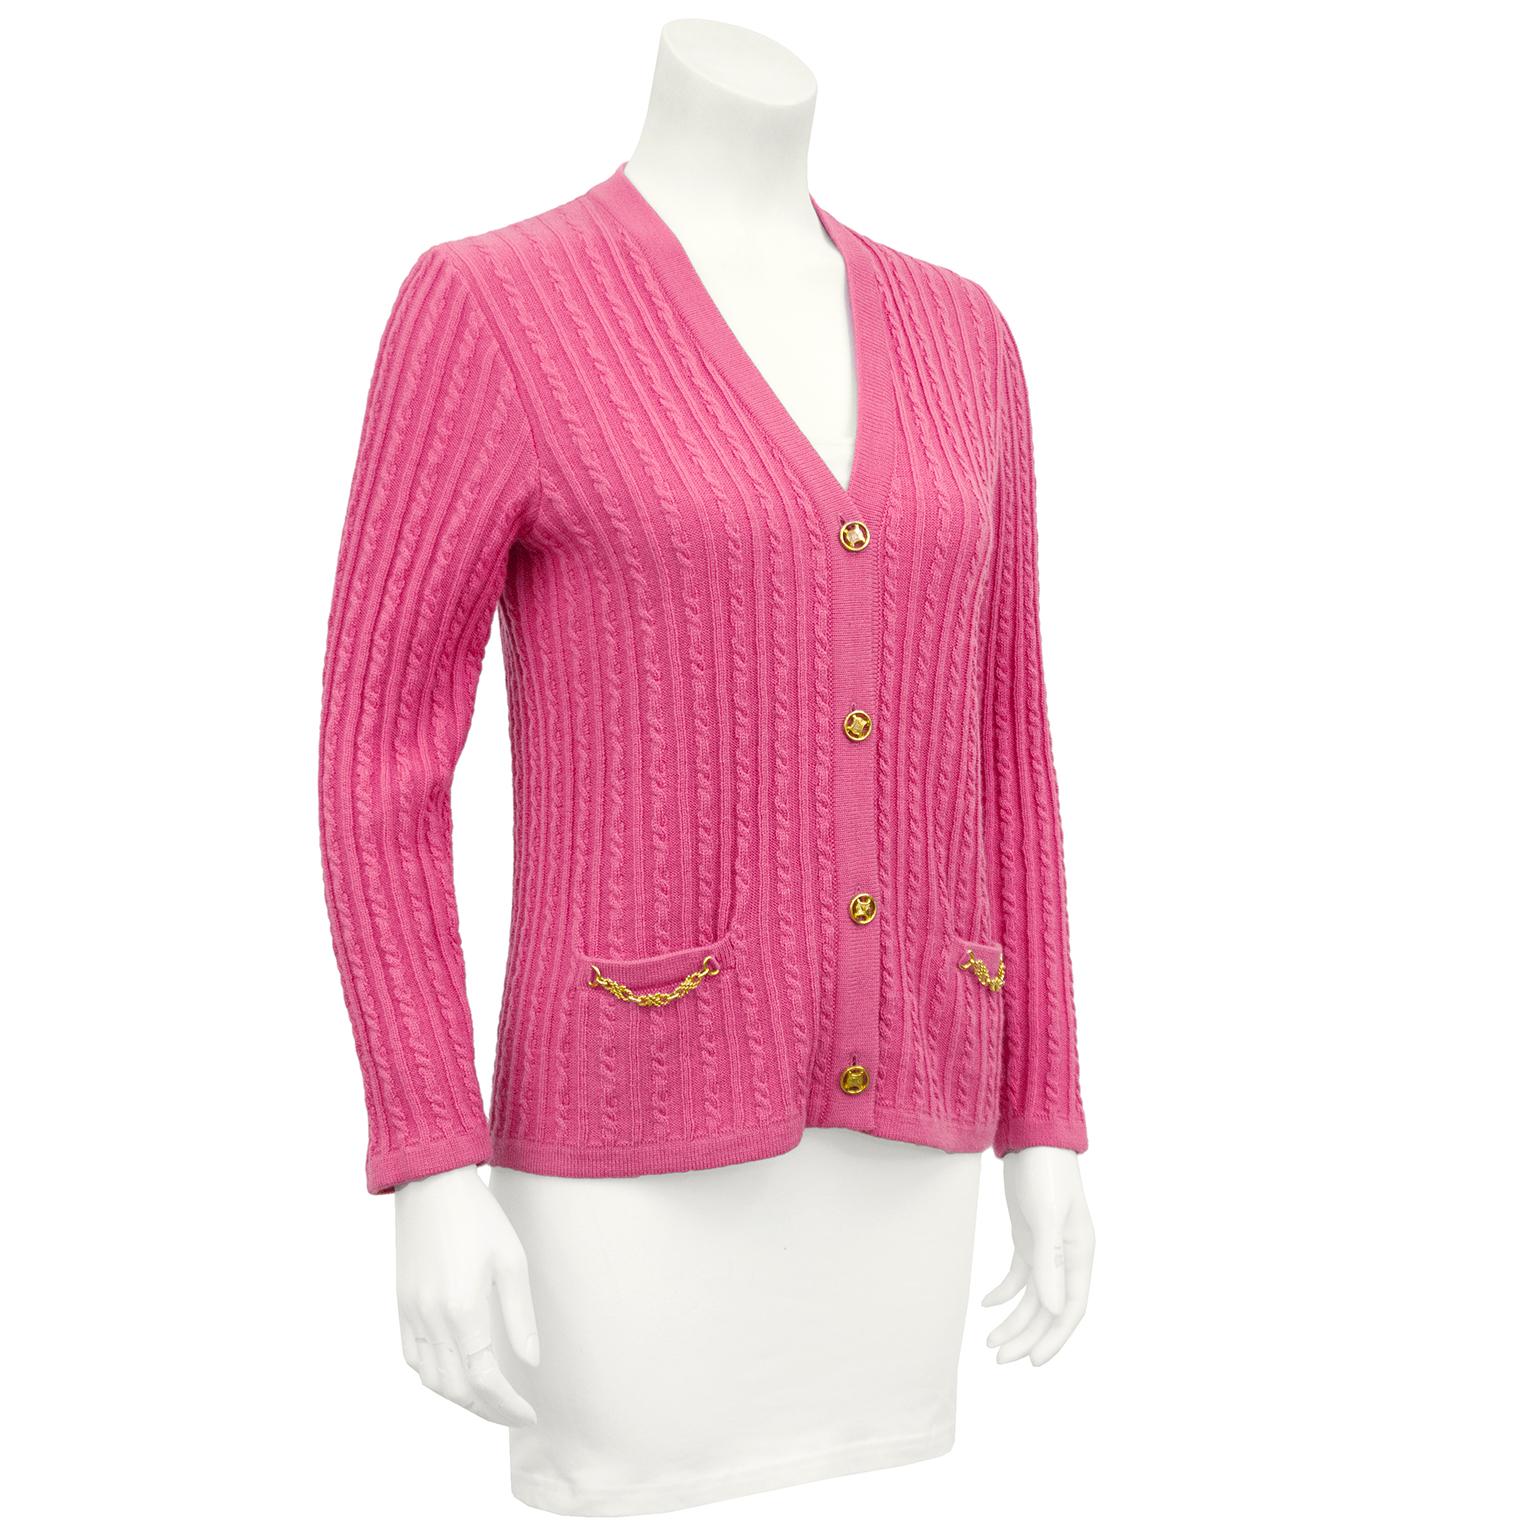 Pretty in pink 1970's Celine cardigan. Wool cable knit with gold Celine logo gold buttons and gold chain details at flat pockets. In excellent vintage condition, marked FR 38. Matches our 1970's Celine Pink Wool Pleated Skirt. 